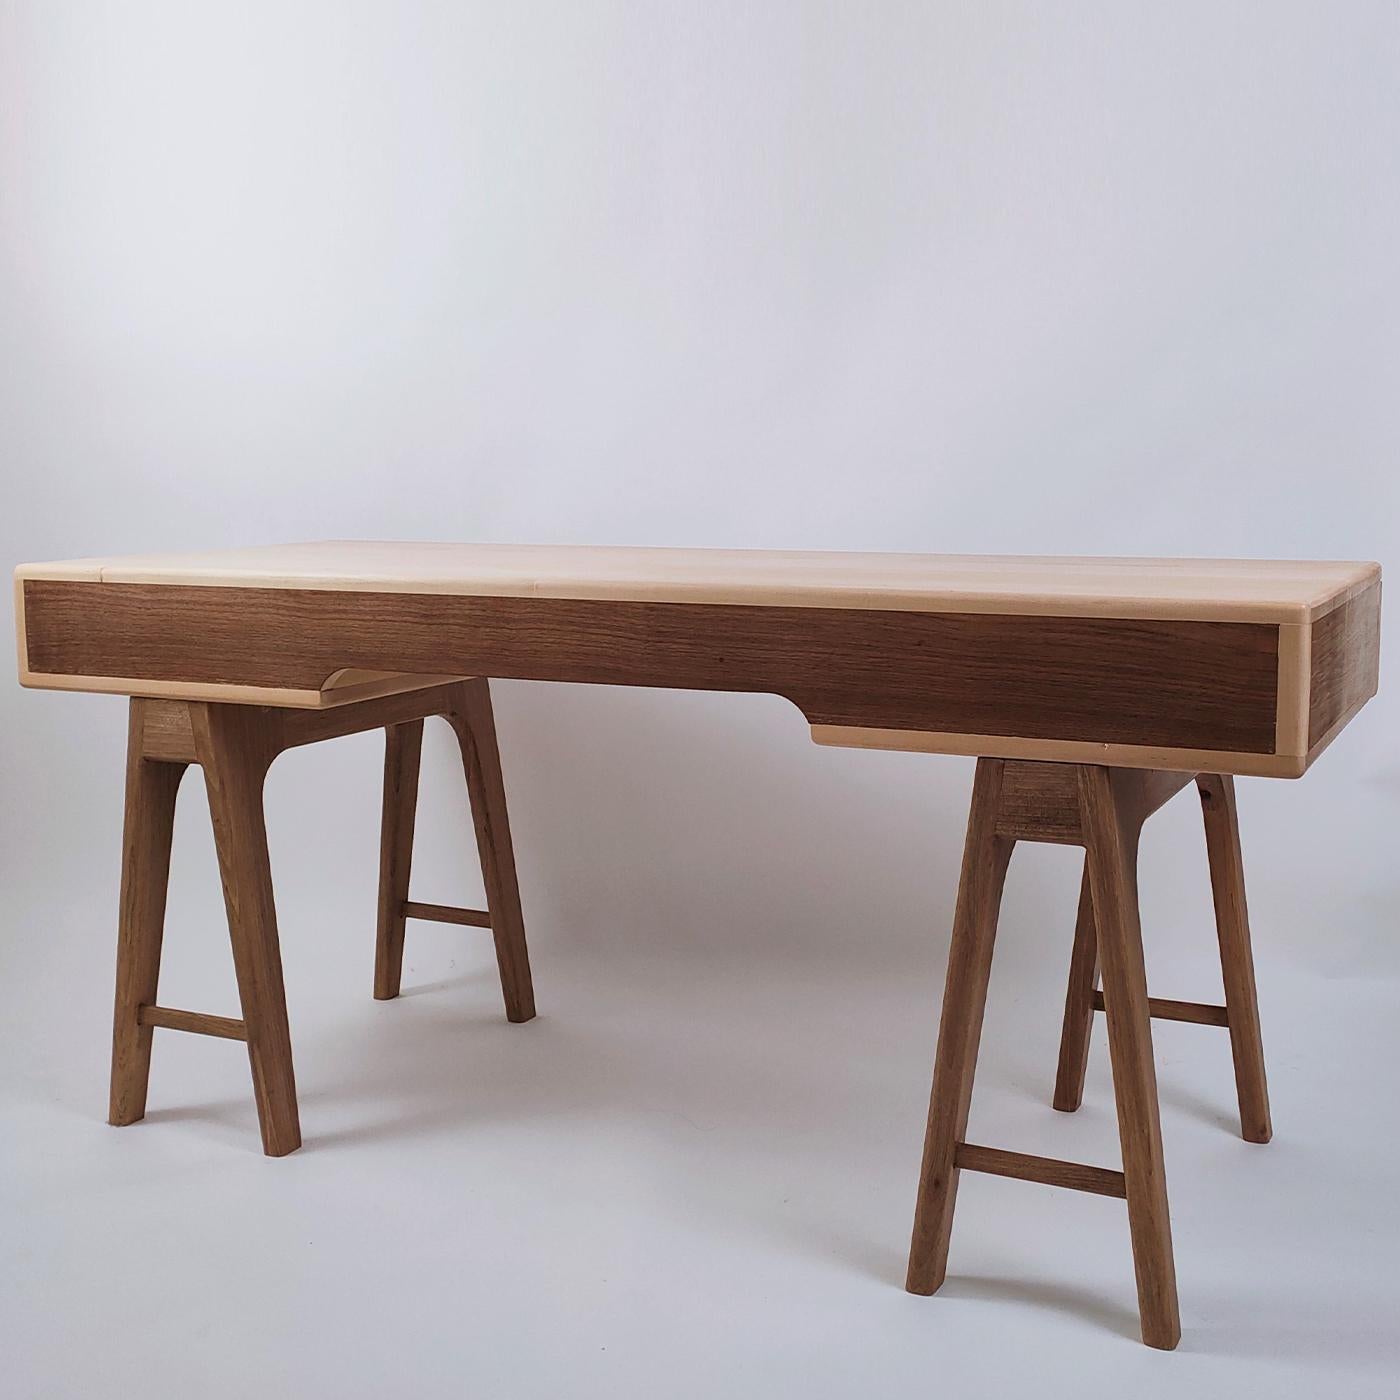 The Nathalie Desk is the ultimate workstation, featuring two trestle legs and a spacious tabletop with hidden drawers to keep the office space stylishly uncluttered. A Scandinavian-style design that channels its penchant for sleek, essential,